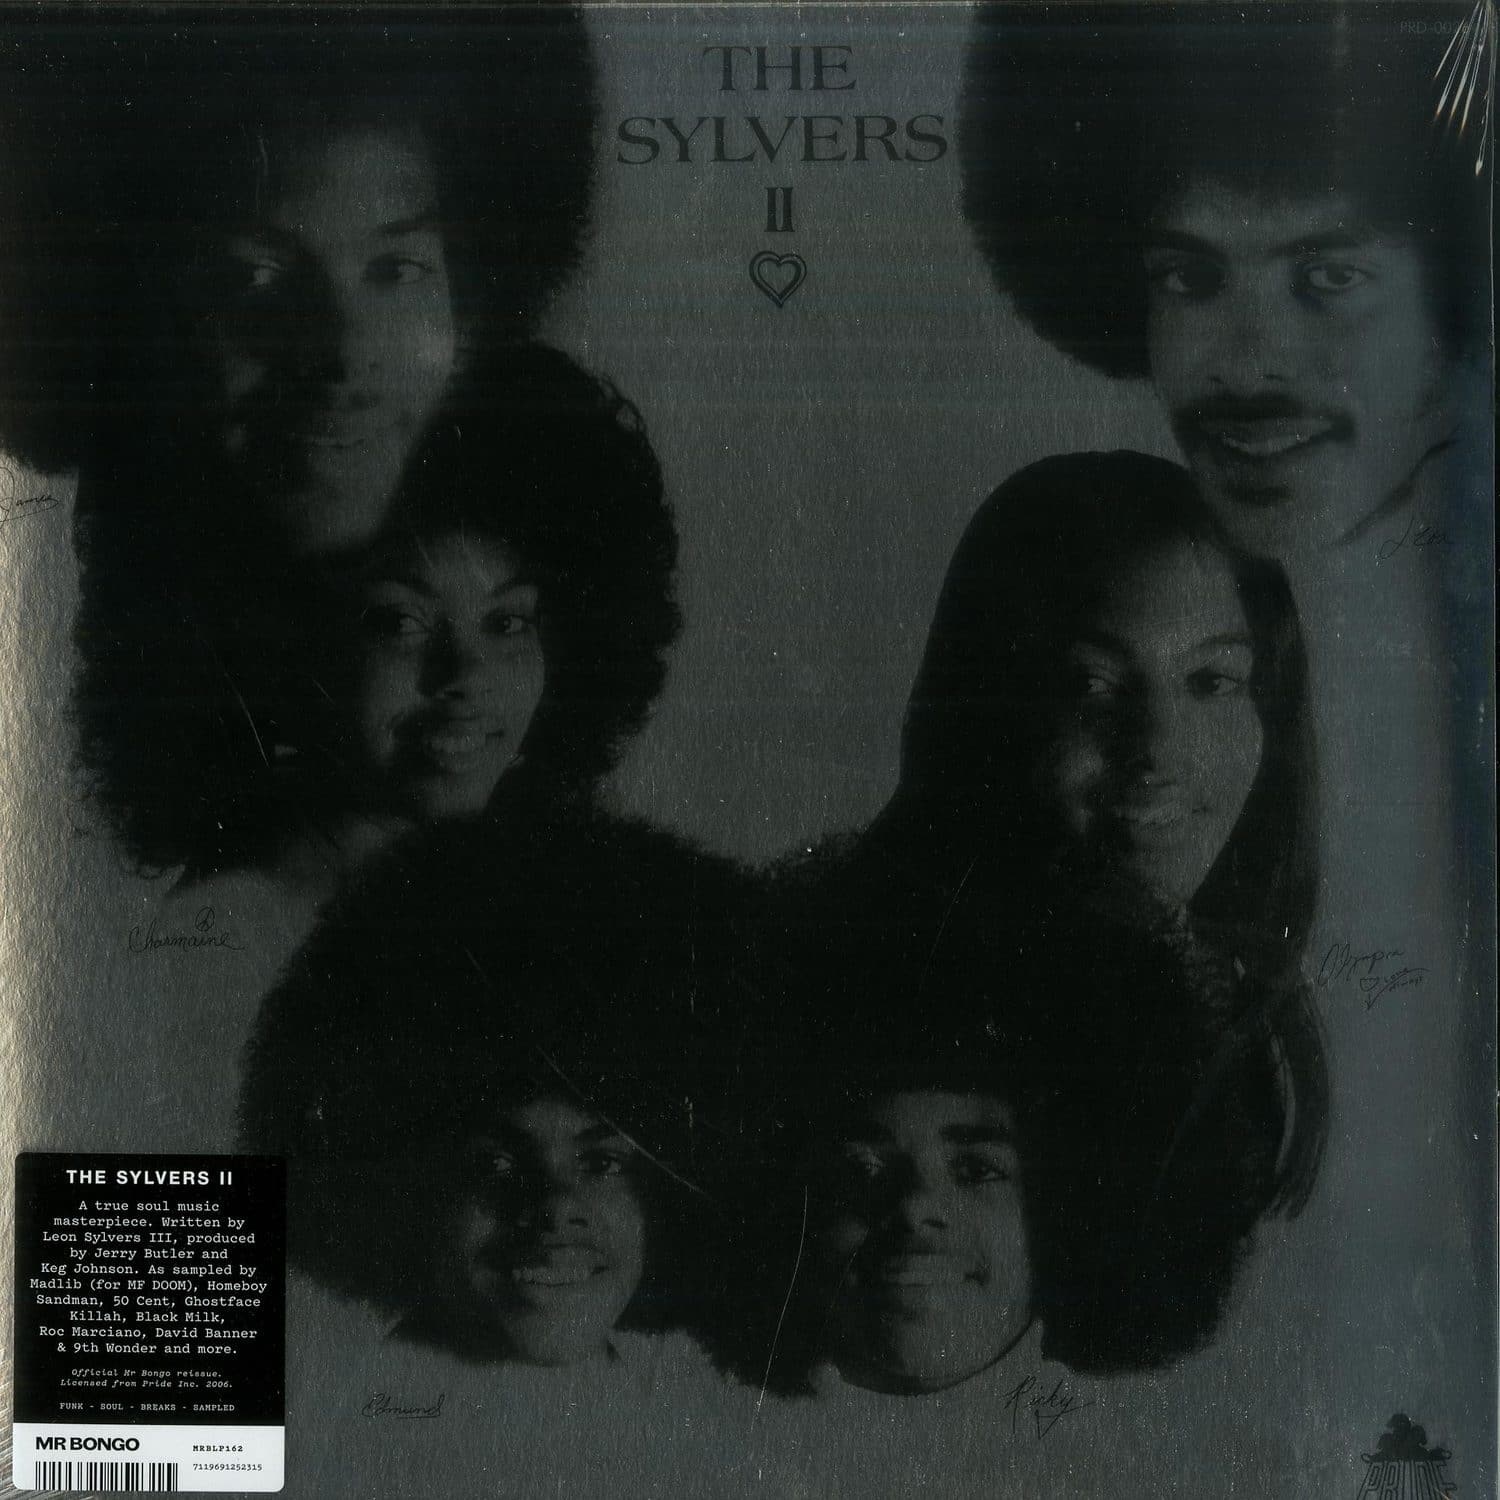 The Sylvers - THE SYLVERS II 